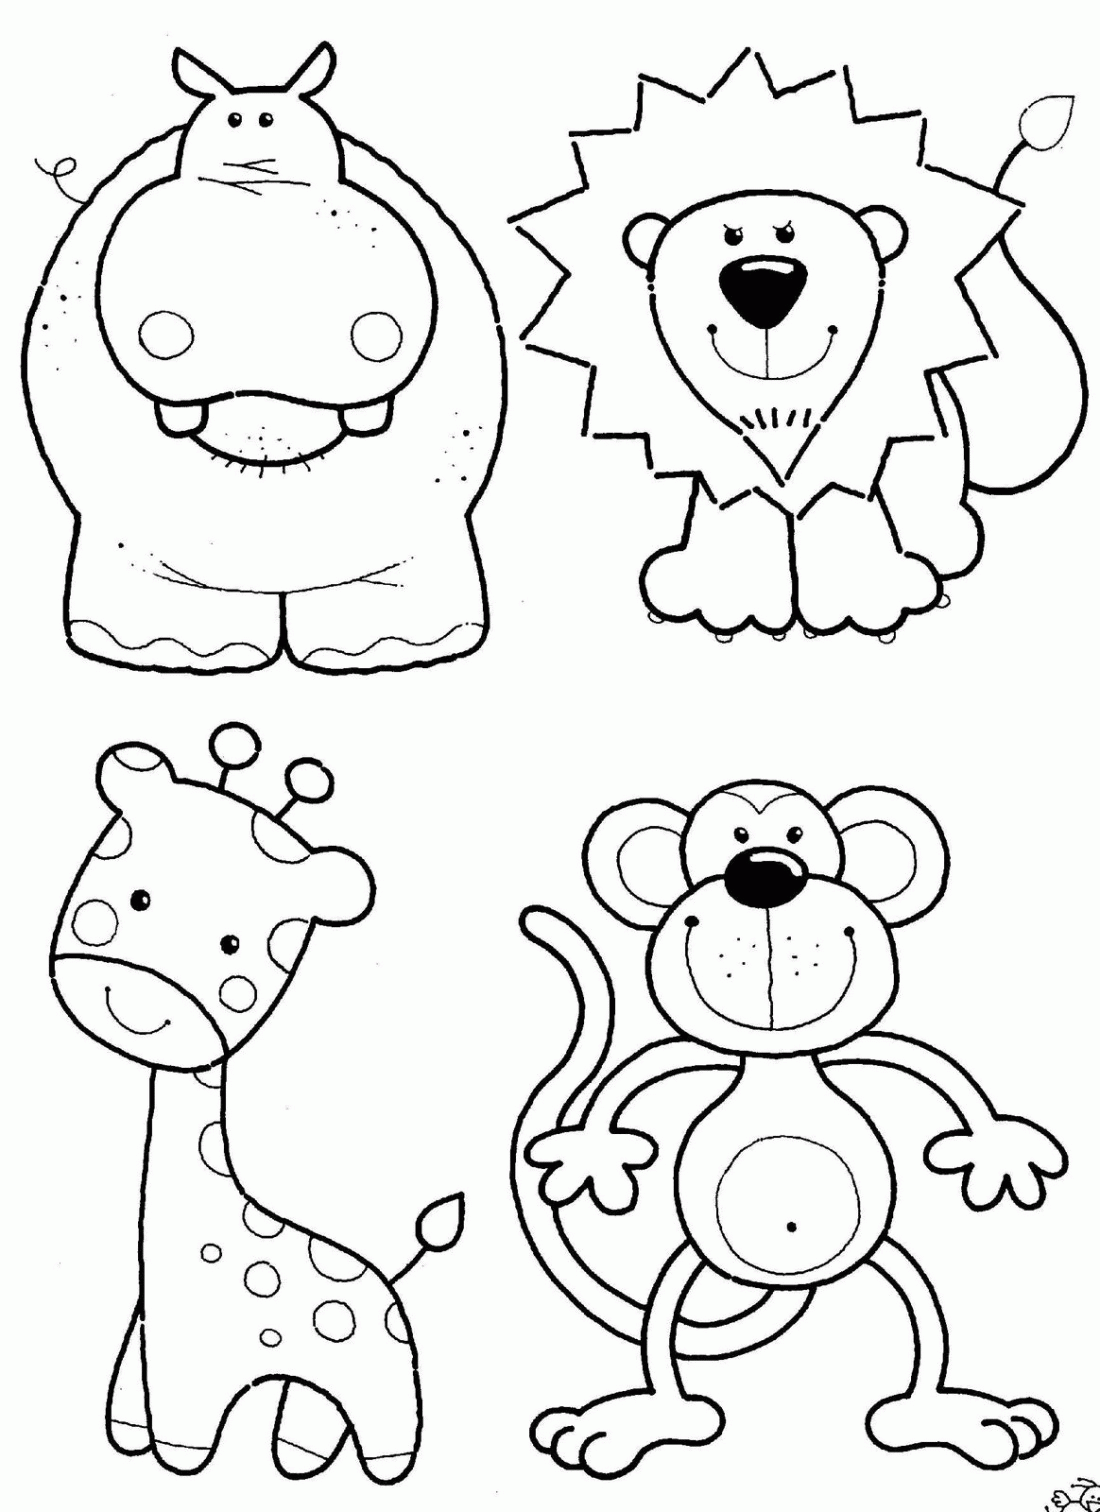 Toddler Coloring Pages | Fotolip.com Rich image and wallpaper